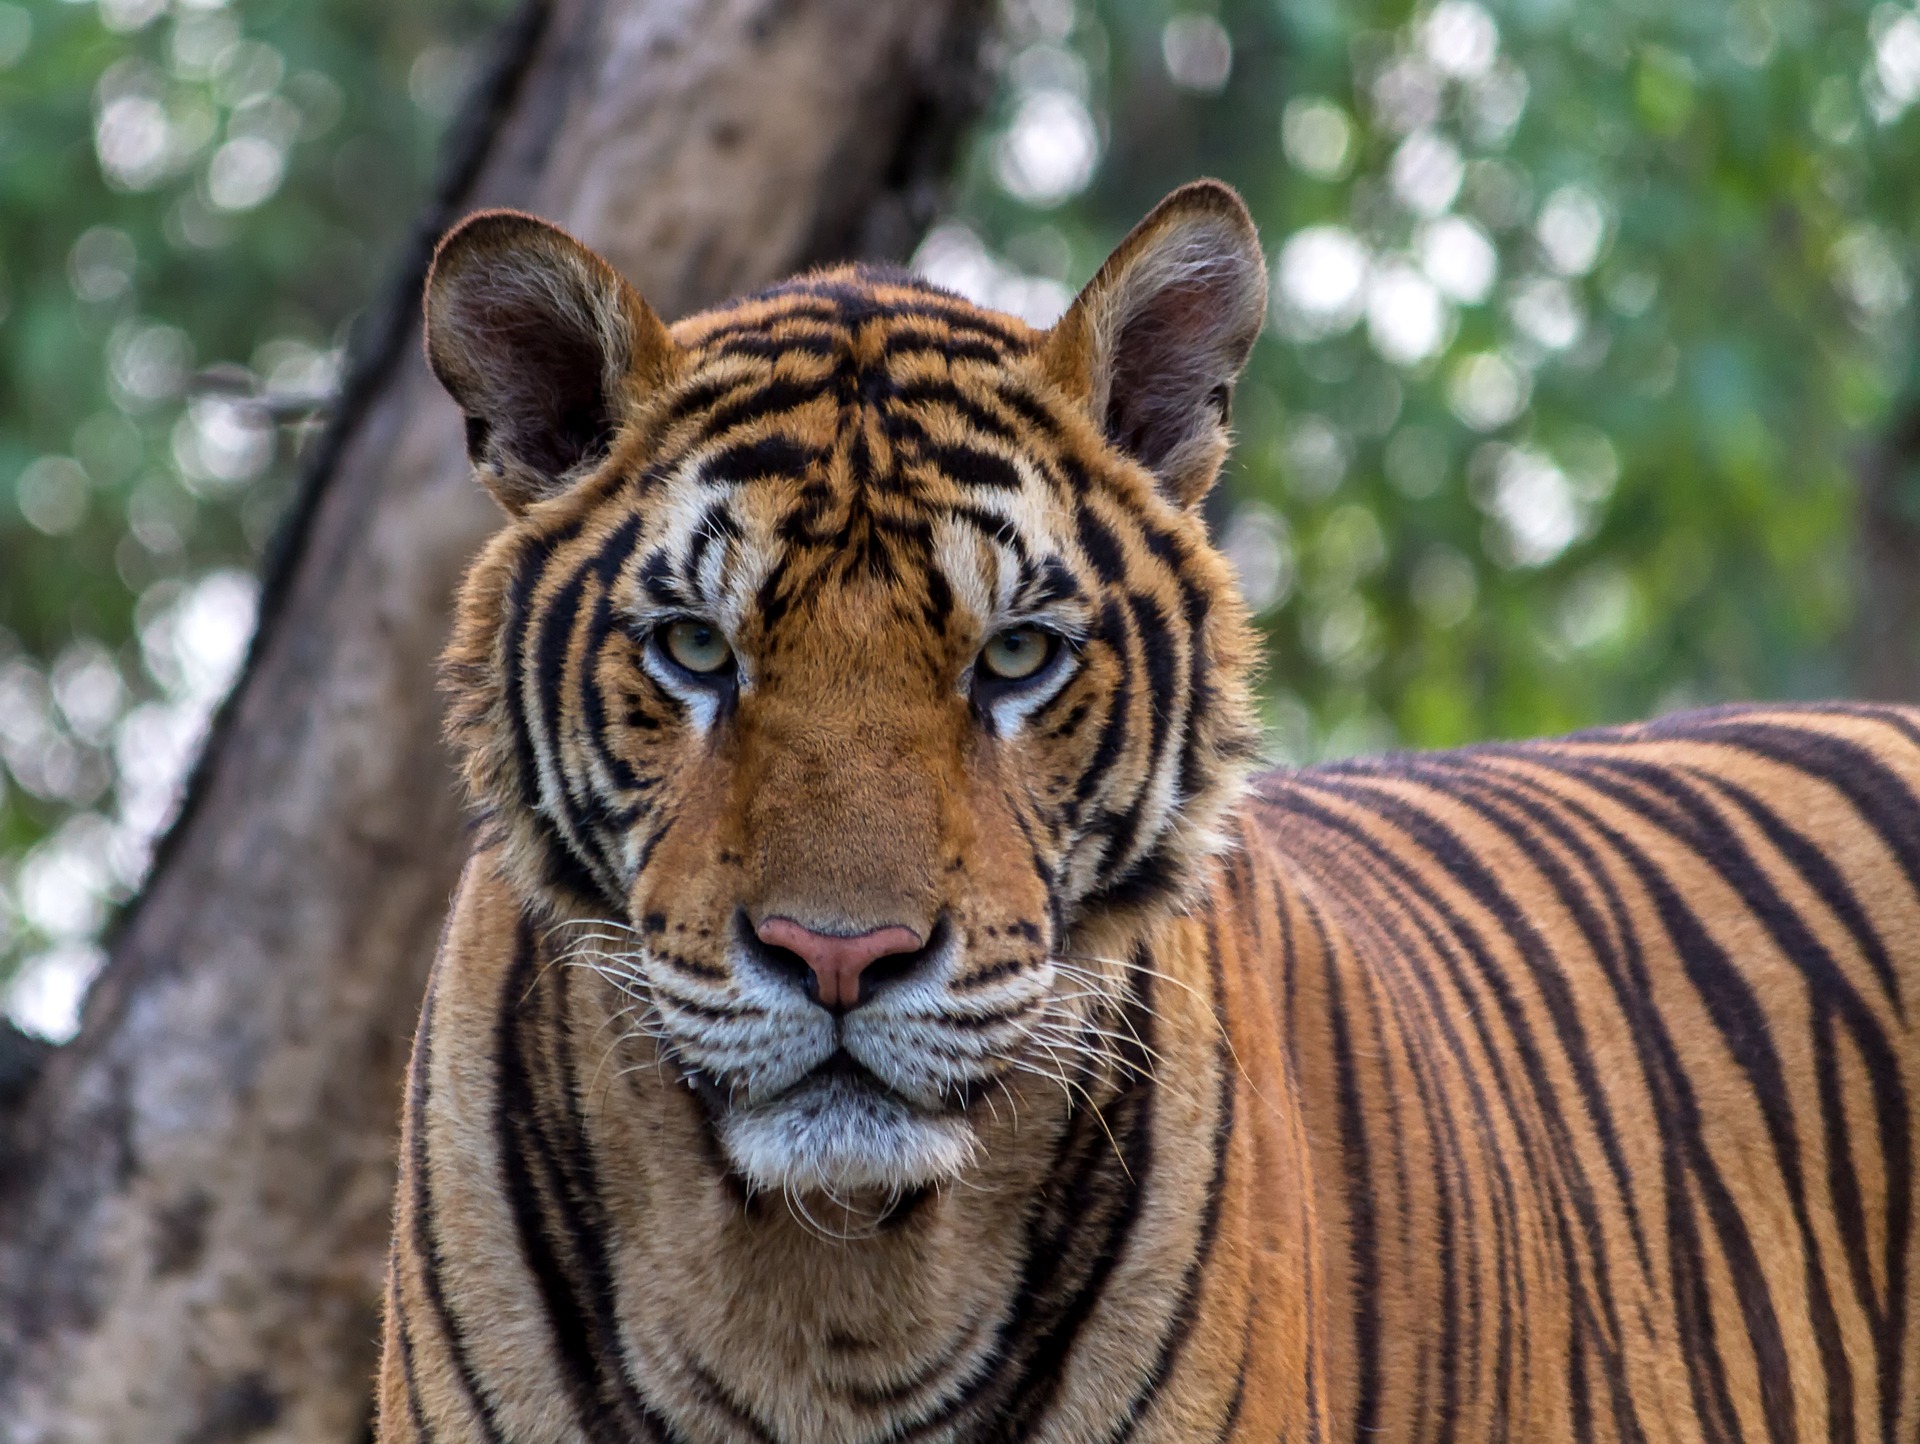 COVID-19 and Cats: Bronx Zoo Tiger Tests Positive